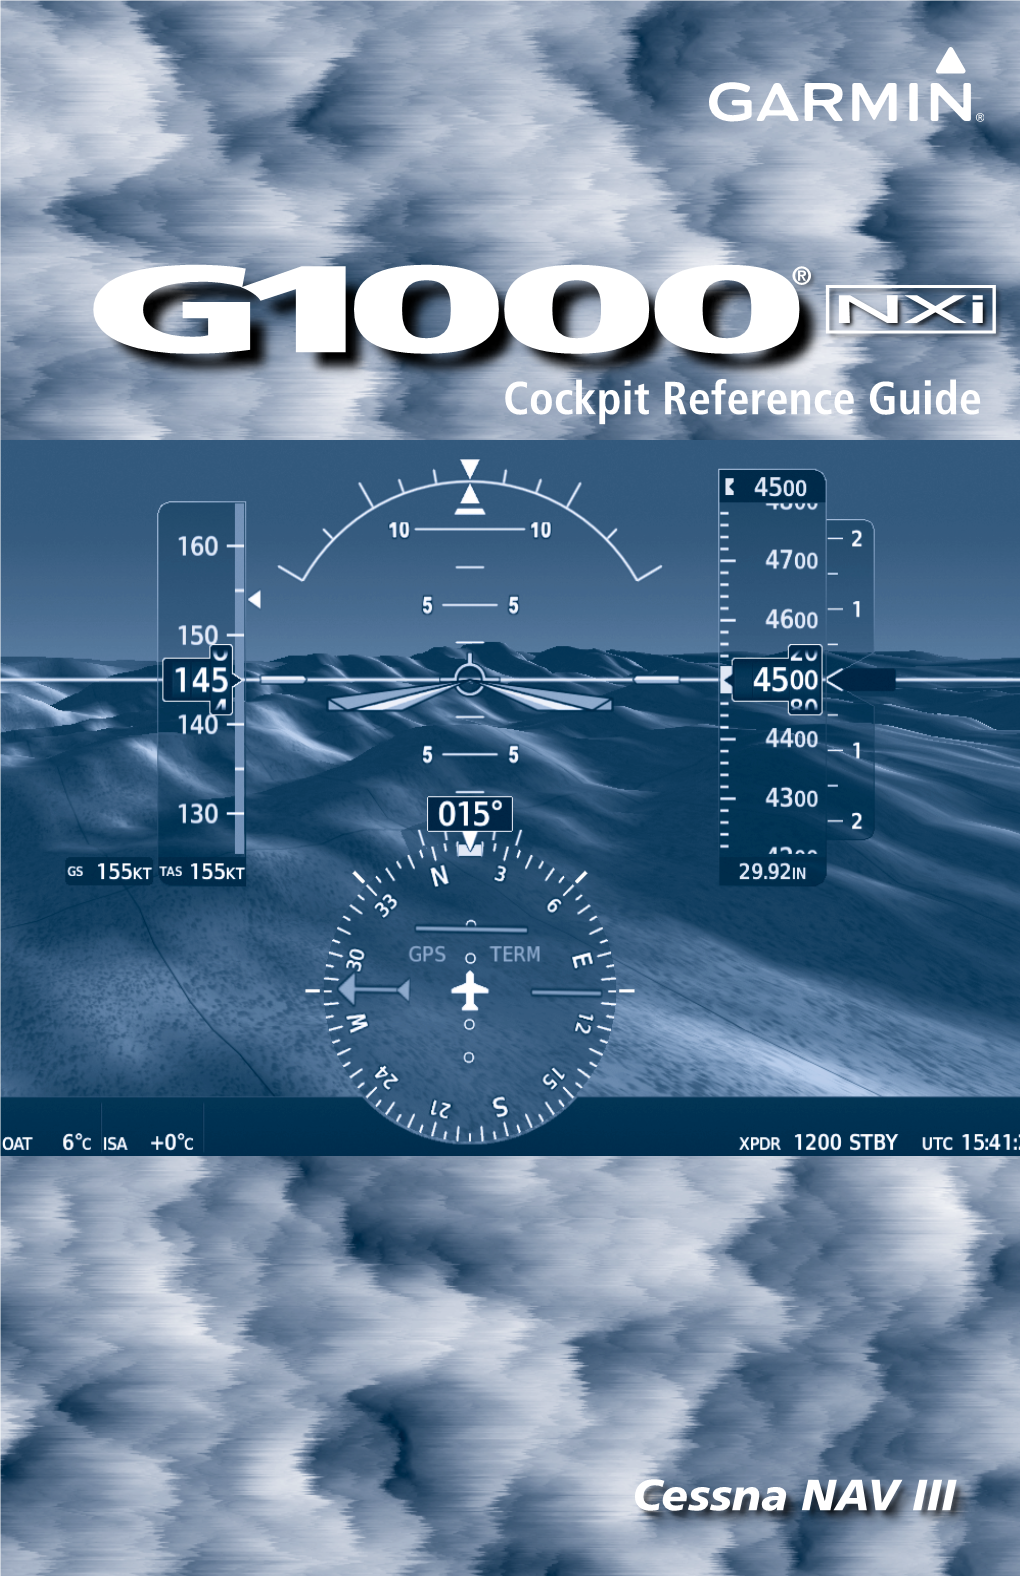 G1000 Nxi Cockpit Reference Guide for the Cessna NAV III Skywatch® and Stormscope® Are Registered Trademarks of L-3 Communications